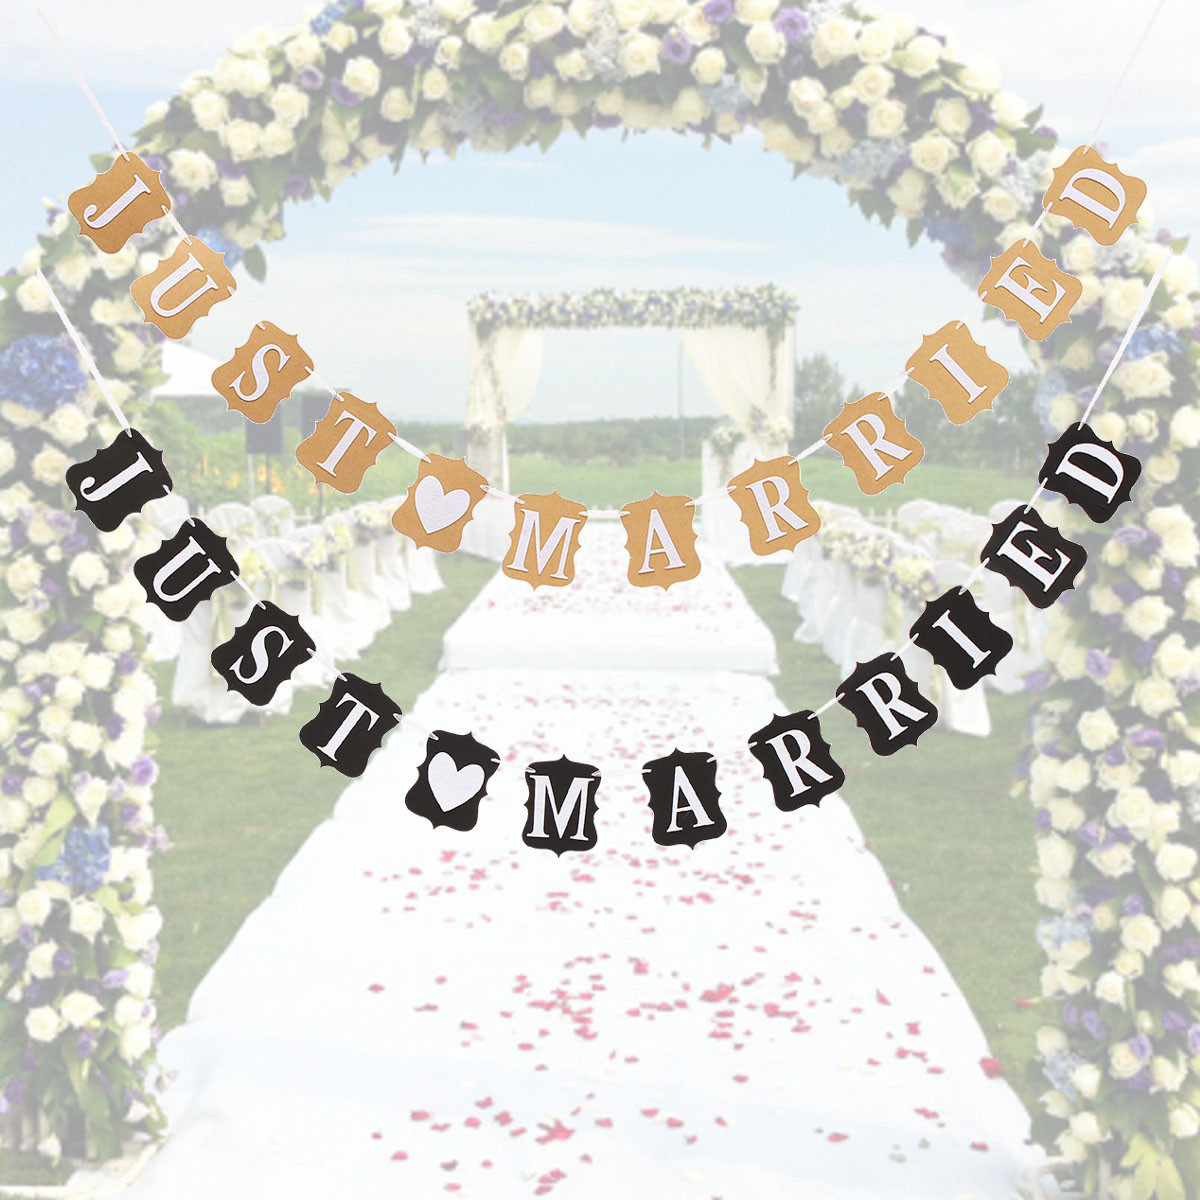 

JUST MARRIED Bunting Wedding Banner Garland Party Photography Flags Decoration Photo Props Supplies